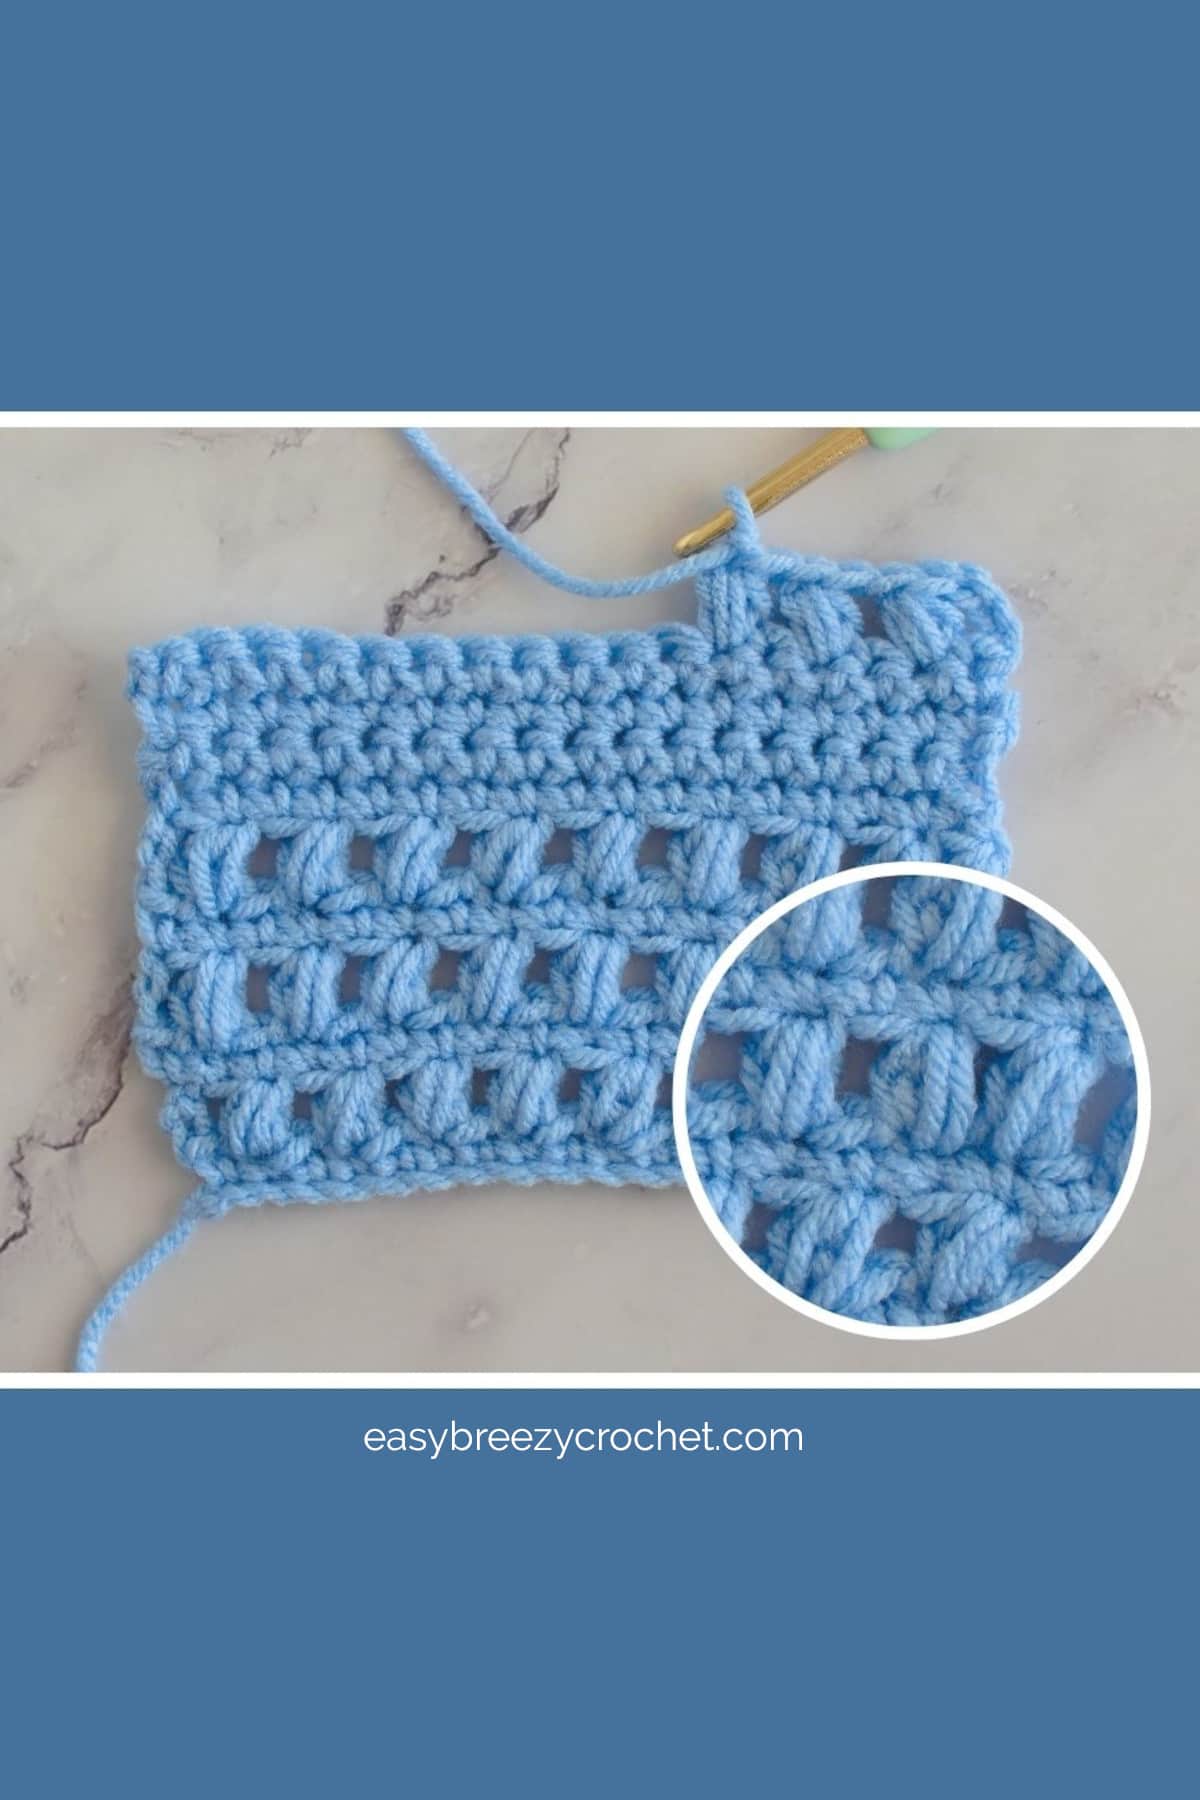 A piece of crochet made with single crochet and crochet puff stitch.